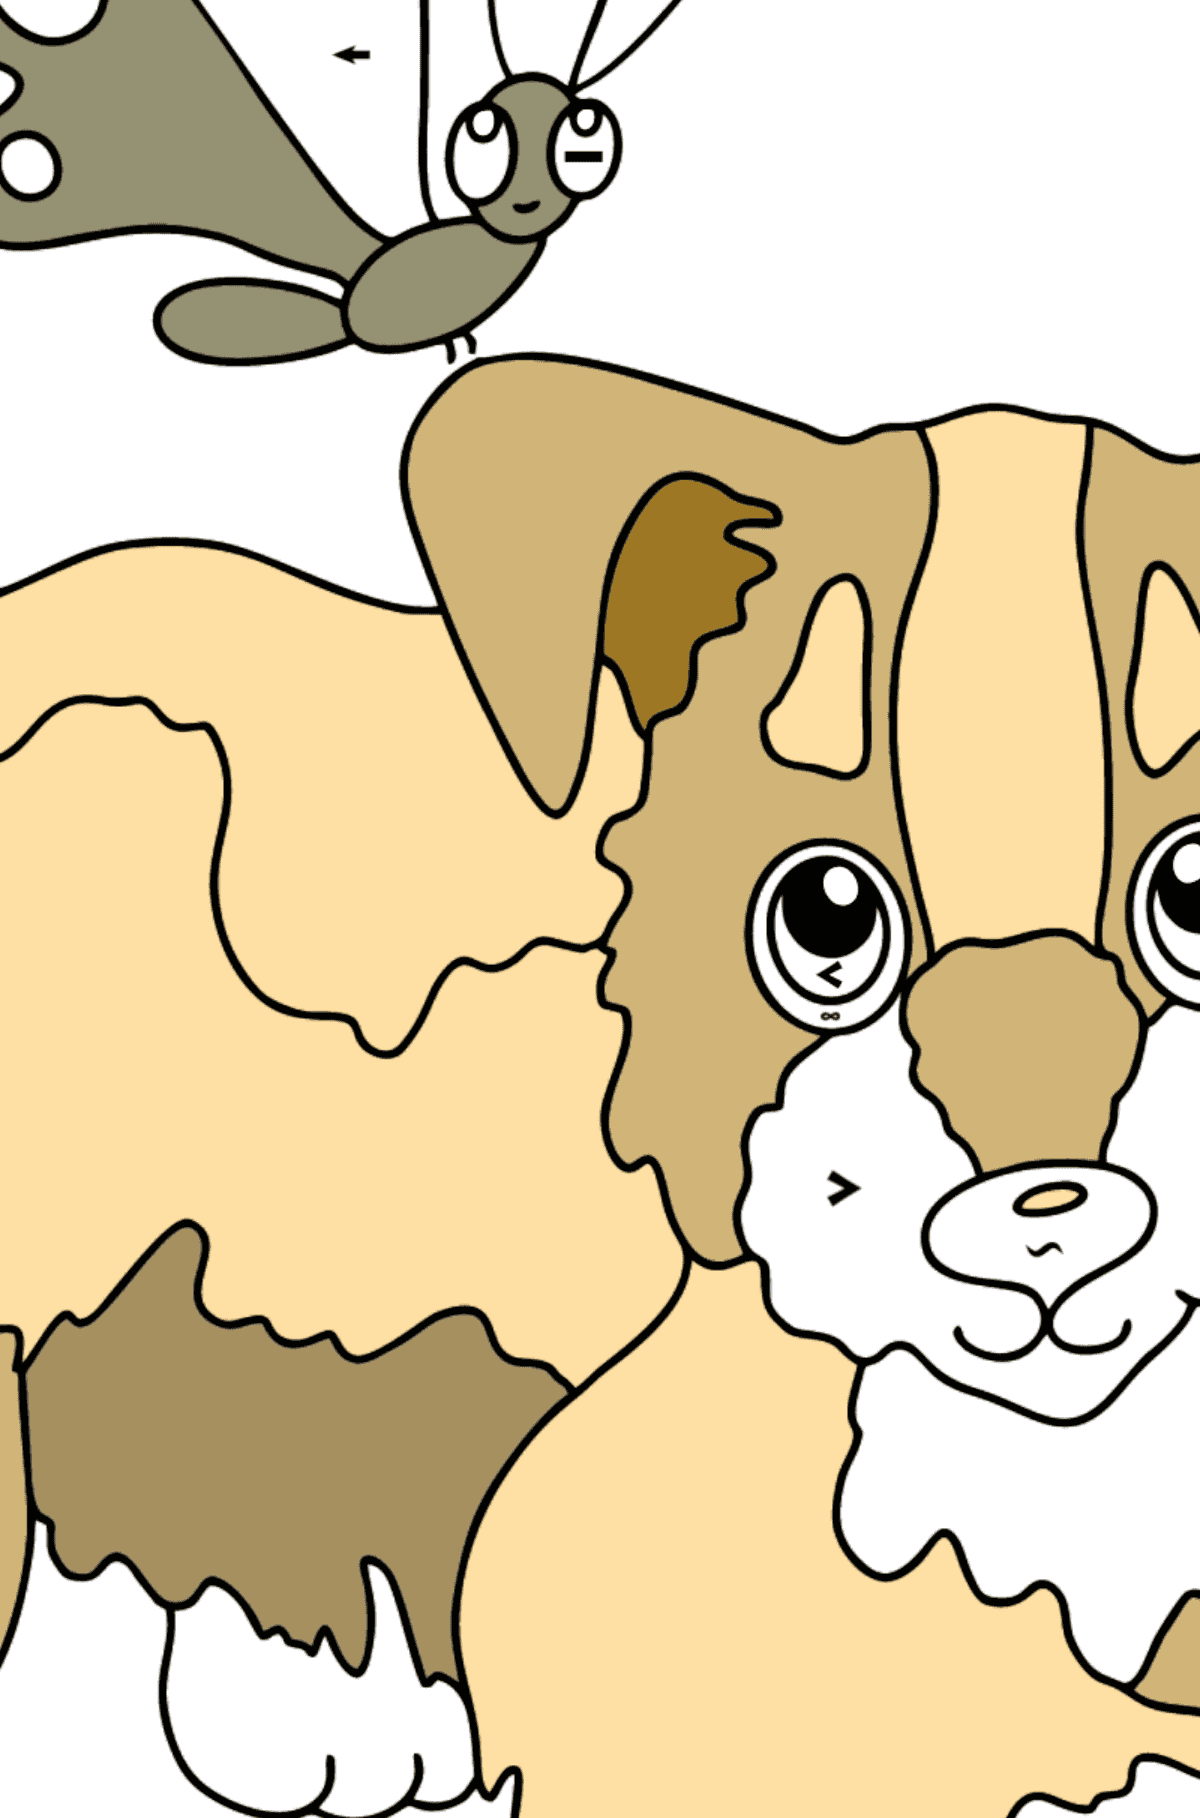 Coloring Page - A Dog is Playing with a Beautiful Butterfly - Coloring by Symbols for Kids